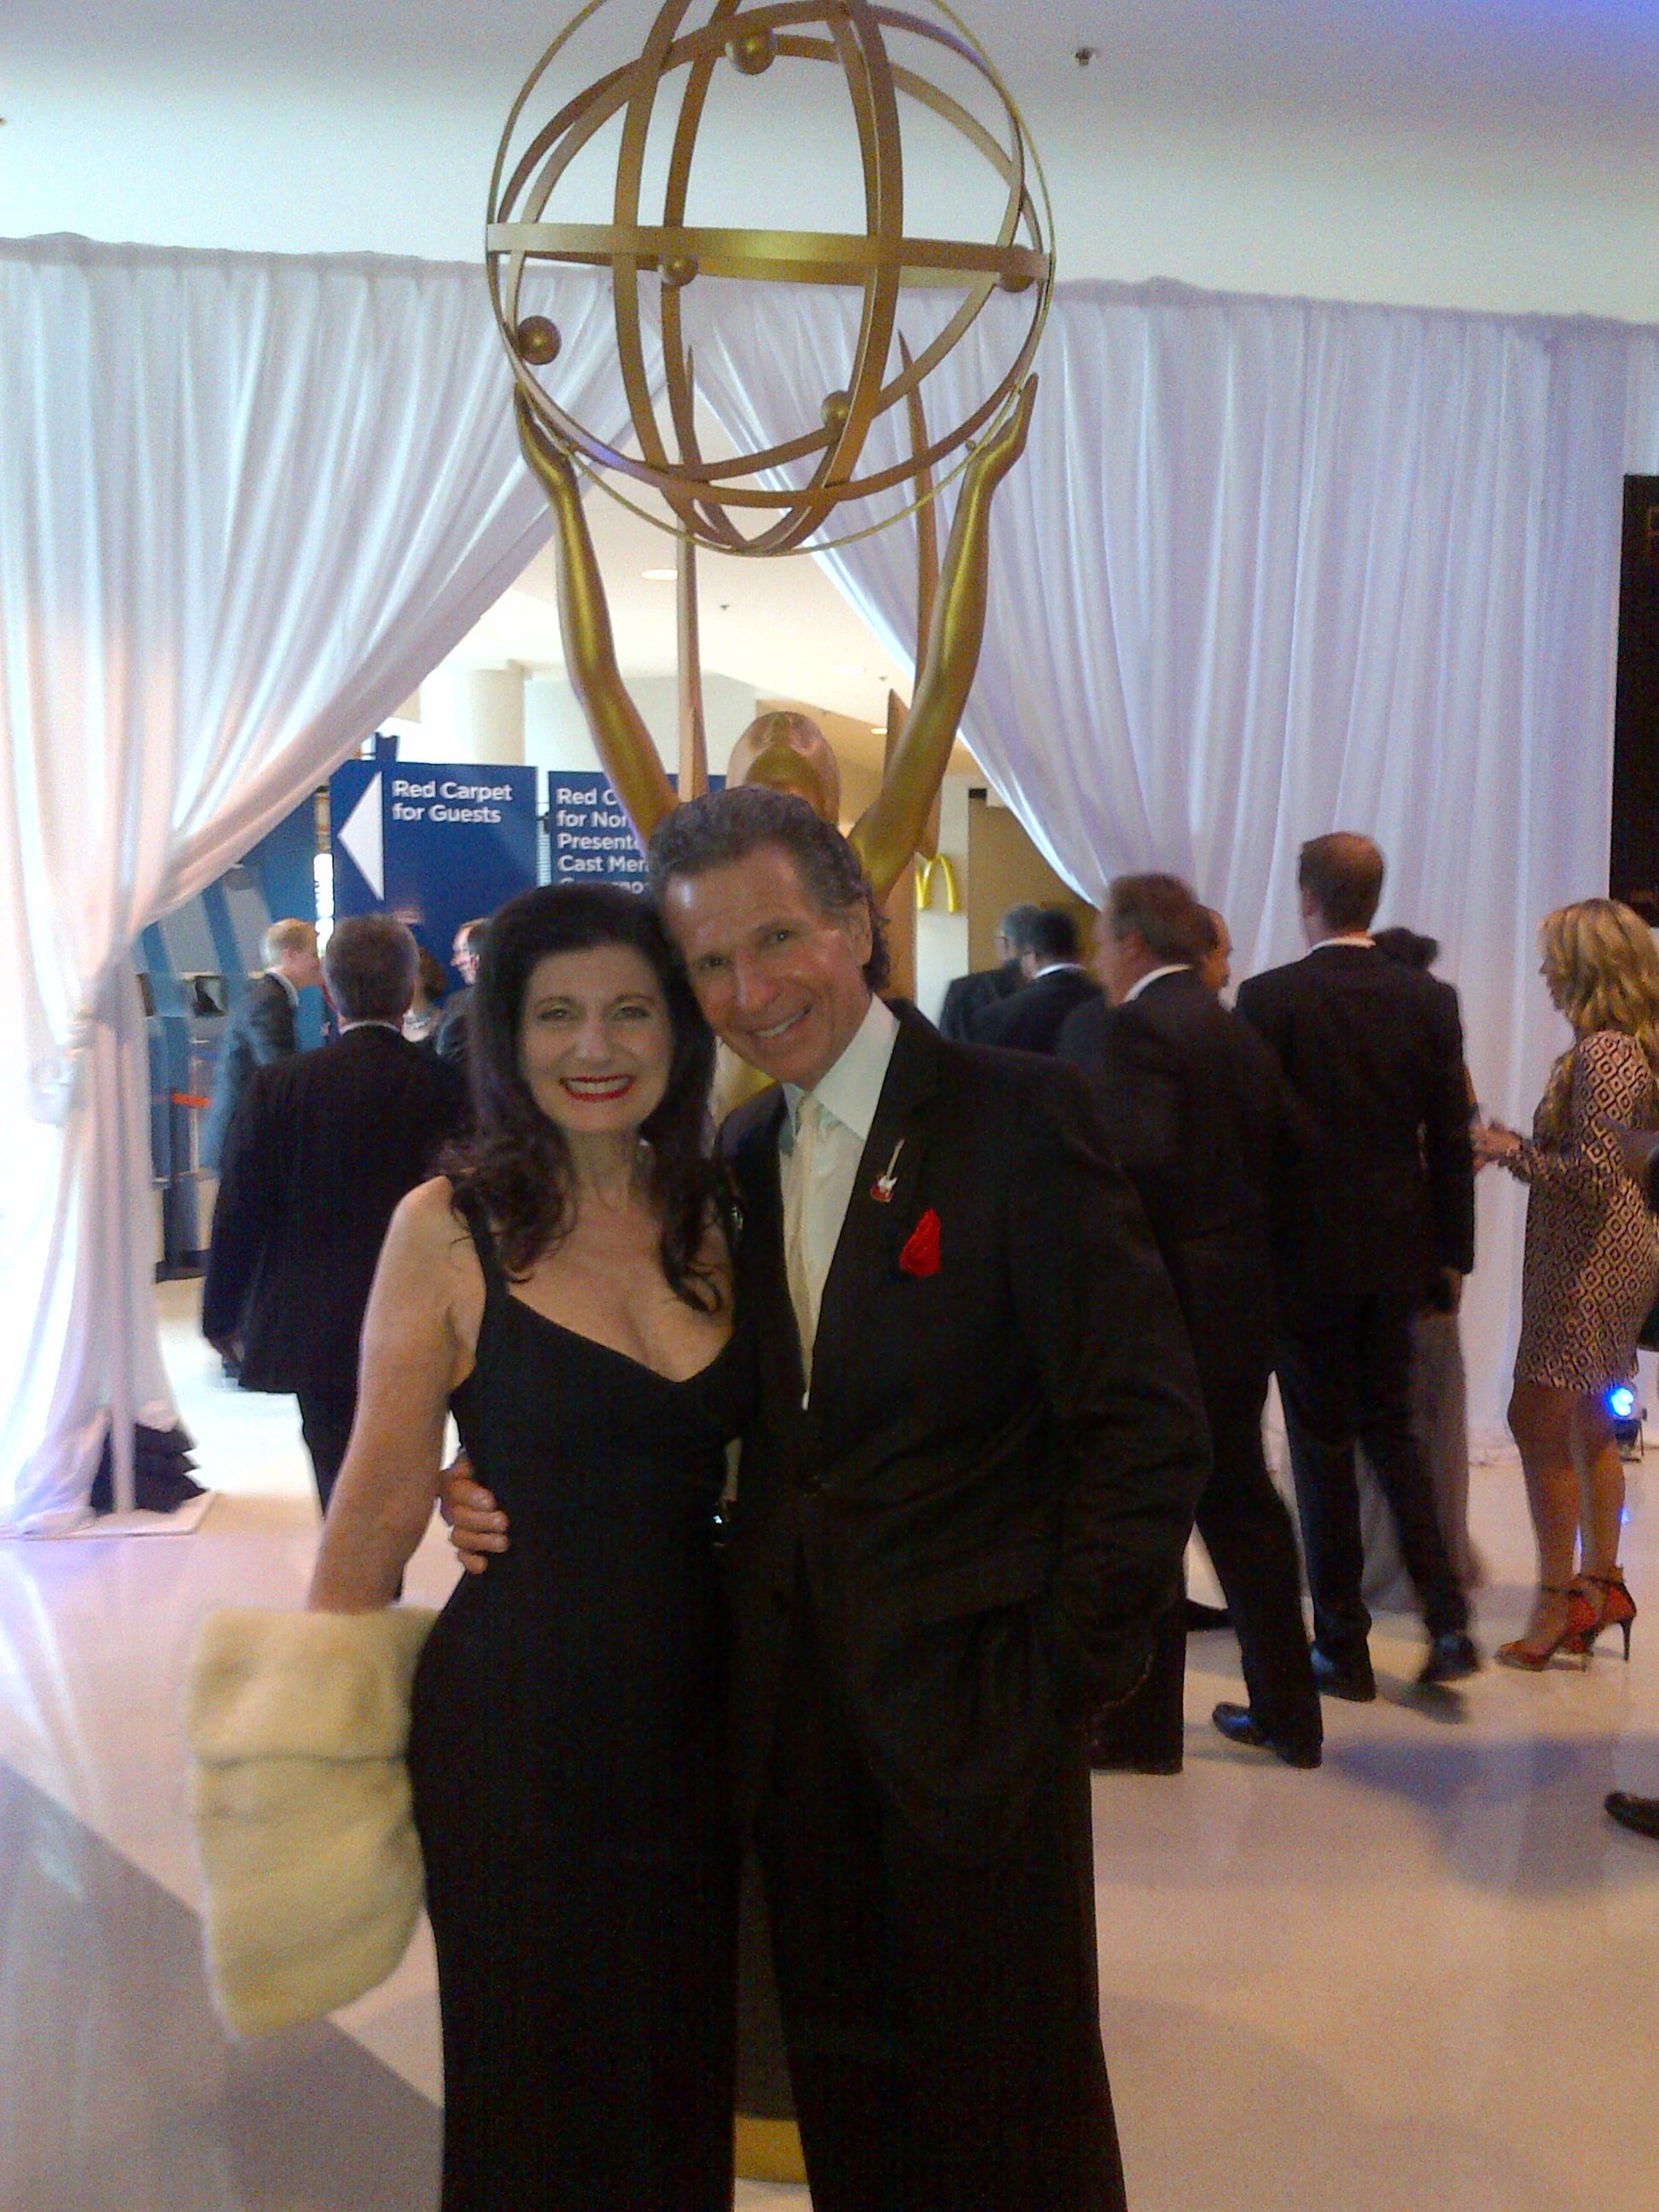 Richard Warren Rappaport with Hello Hollywood's Rene' Katz at the 2014 Primetime Emmy Awards Pre-Telecast Red Carpet Reception, Nokia Theater, LA Live, Los Angeles.